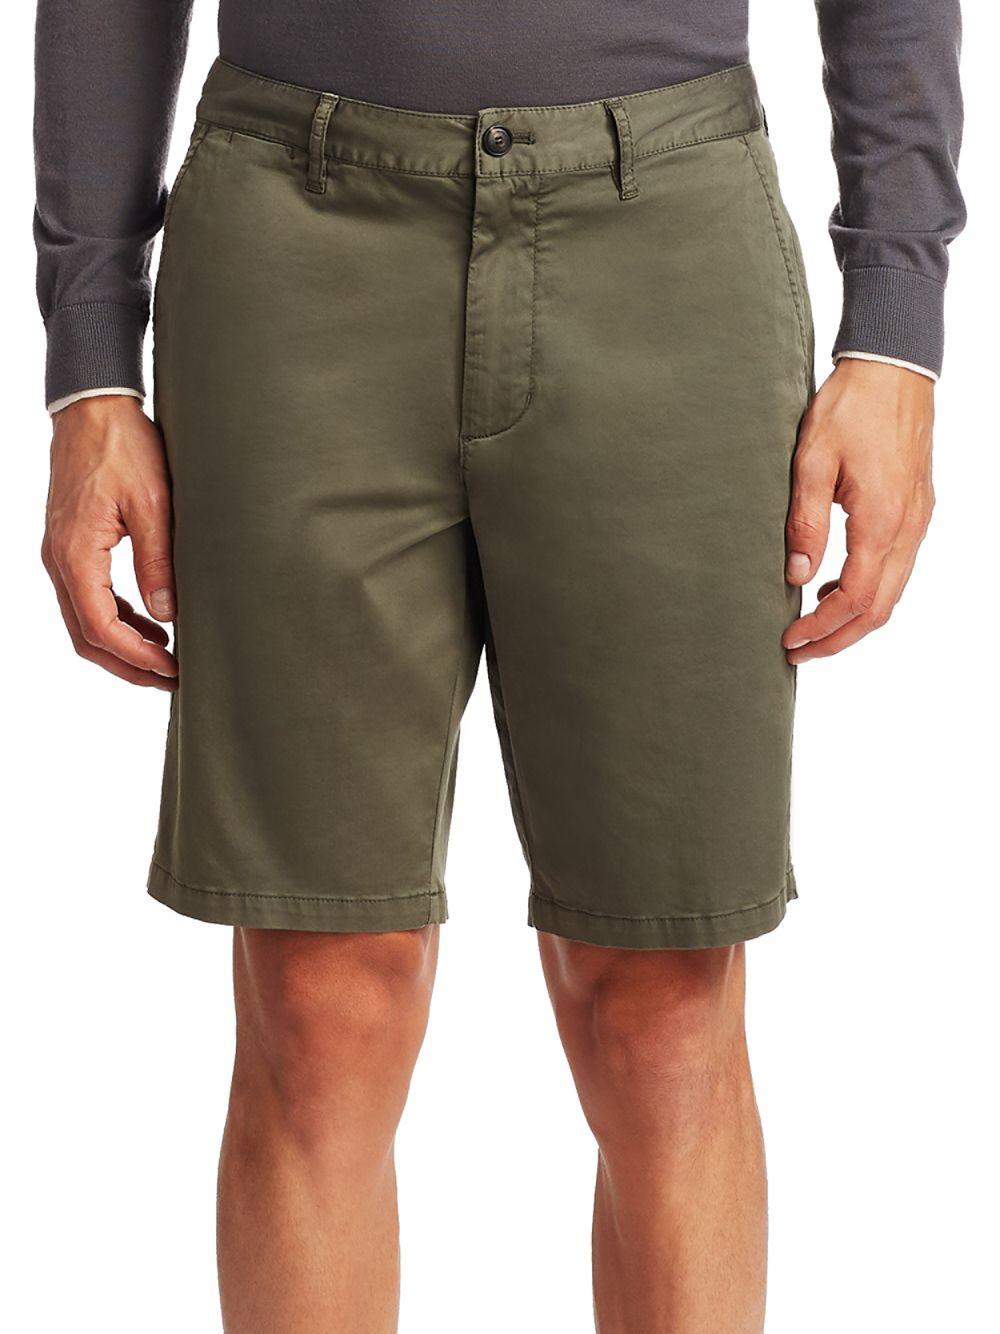 Emporio Armani Olive Cotton Shorts in Green for Men - Lyst